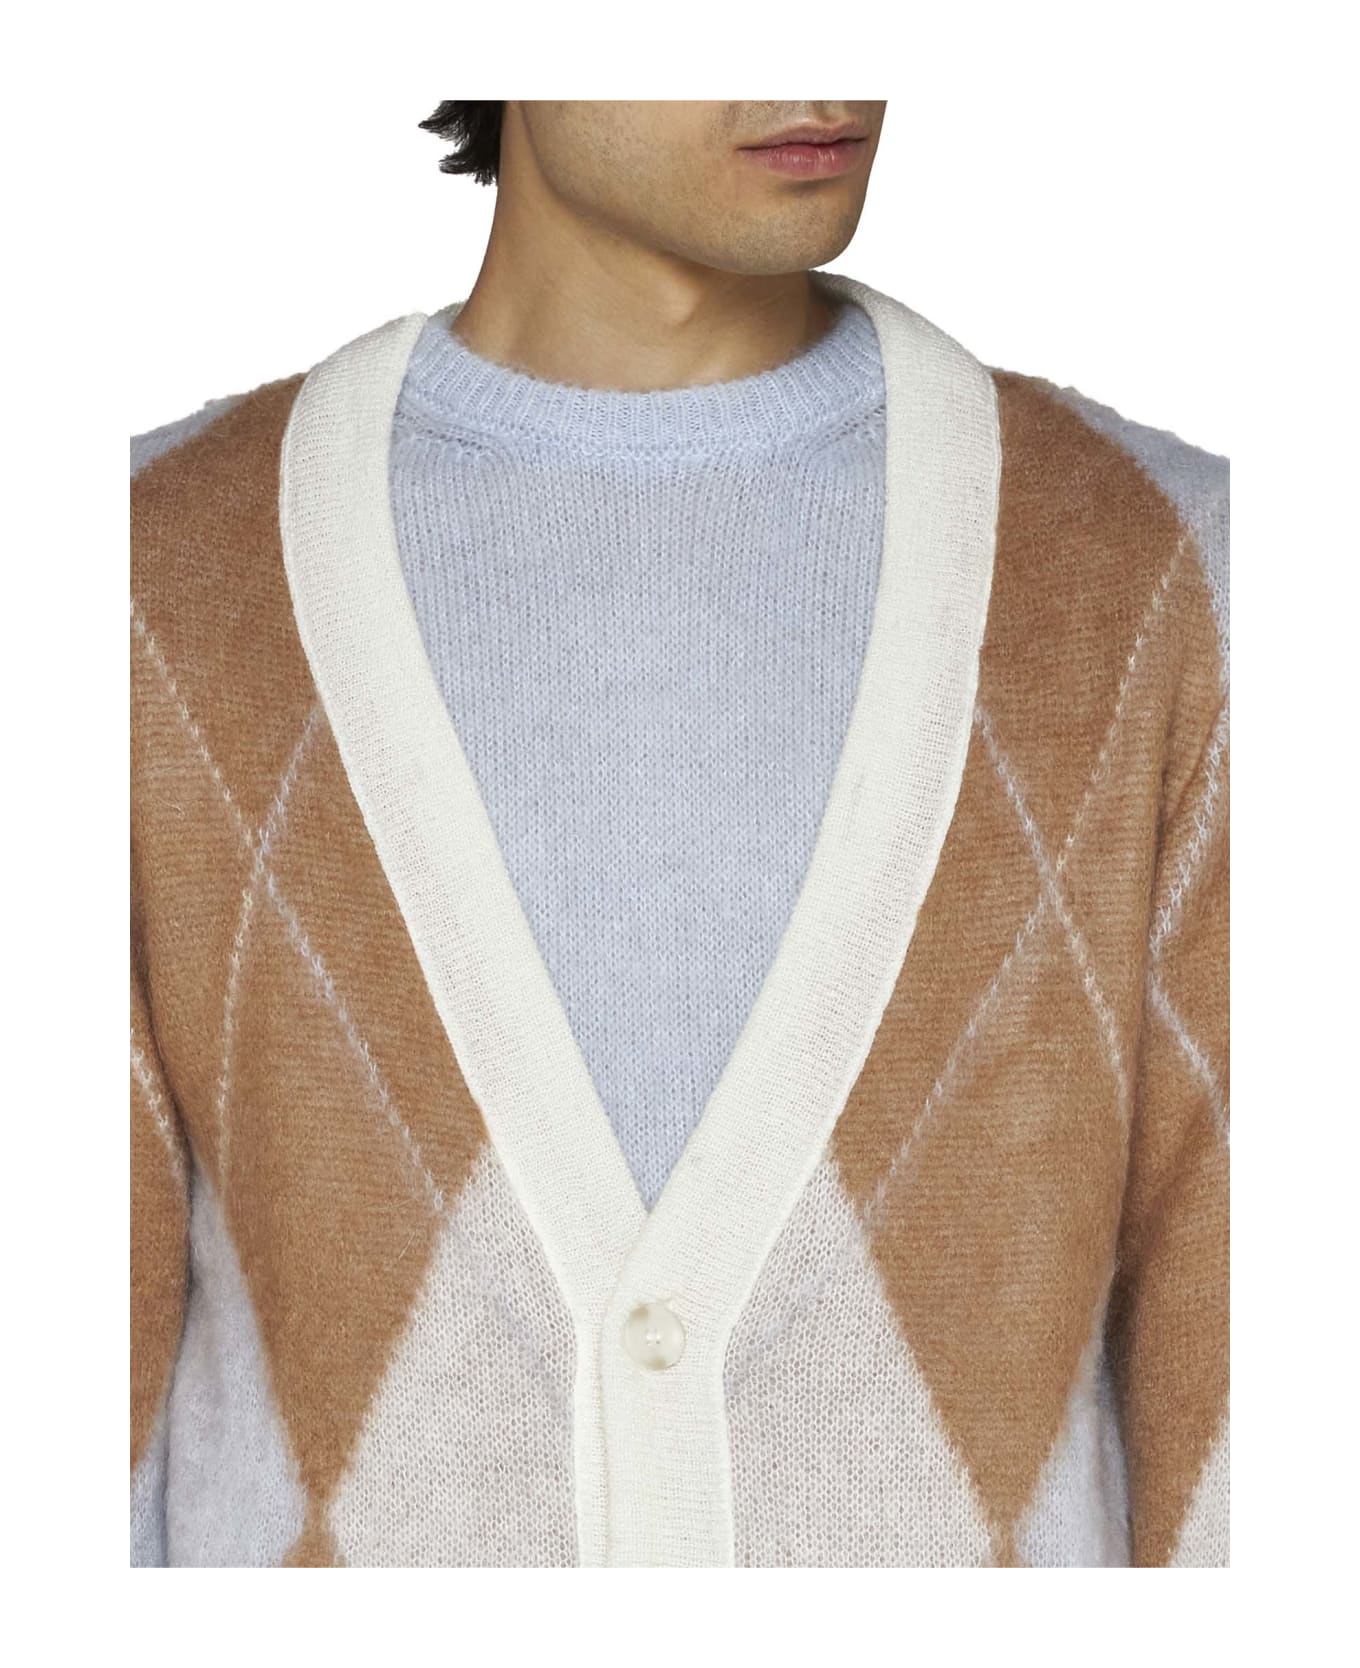 Family First Milano Cardigan - Beige